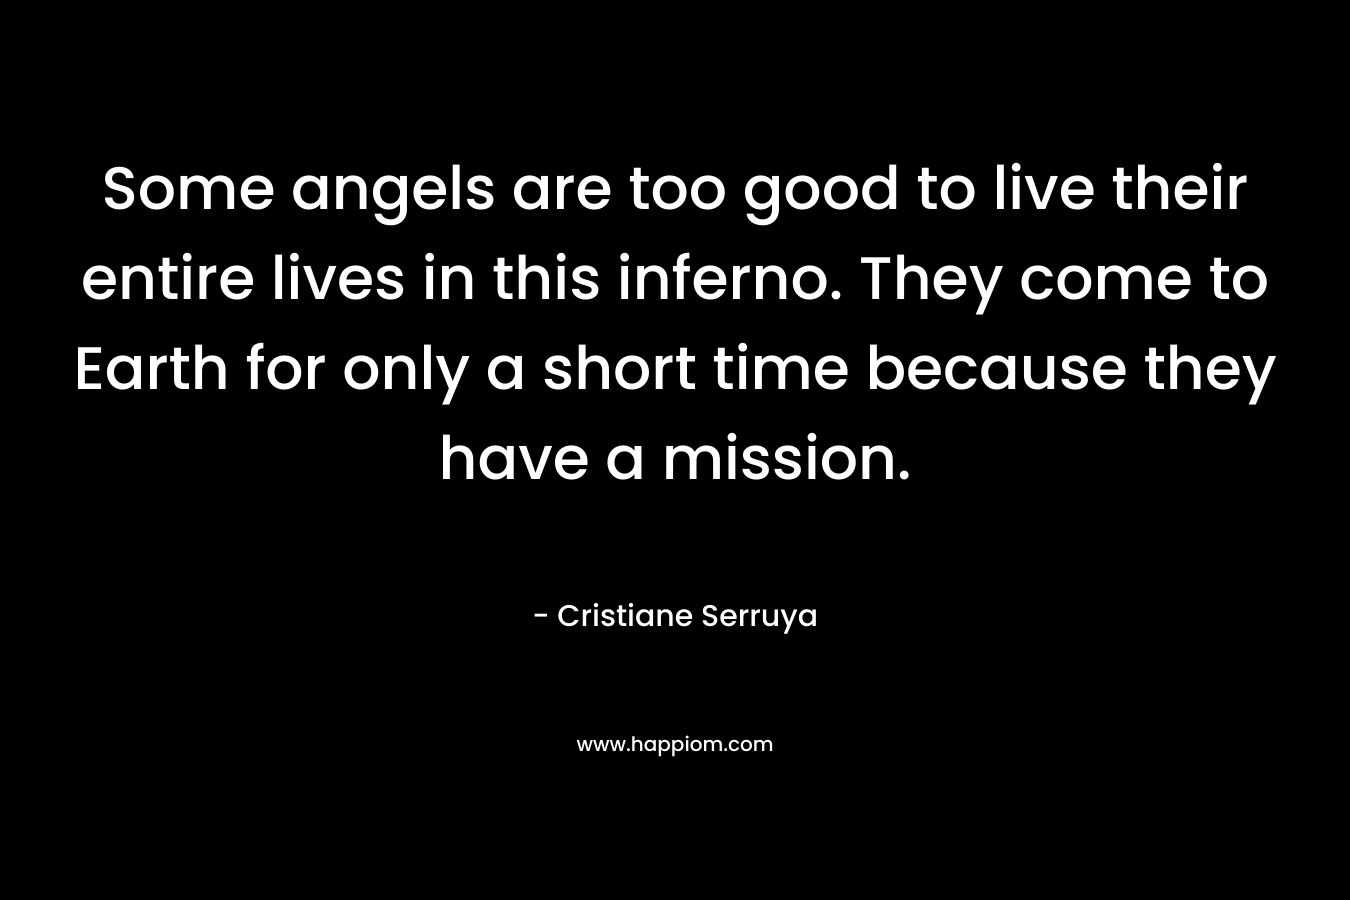 Some angels are too good to live their entire lives in this inferno. They come to Earth for only a short time because they have a mission. – Cristiane Serruya